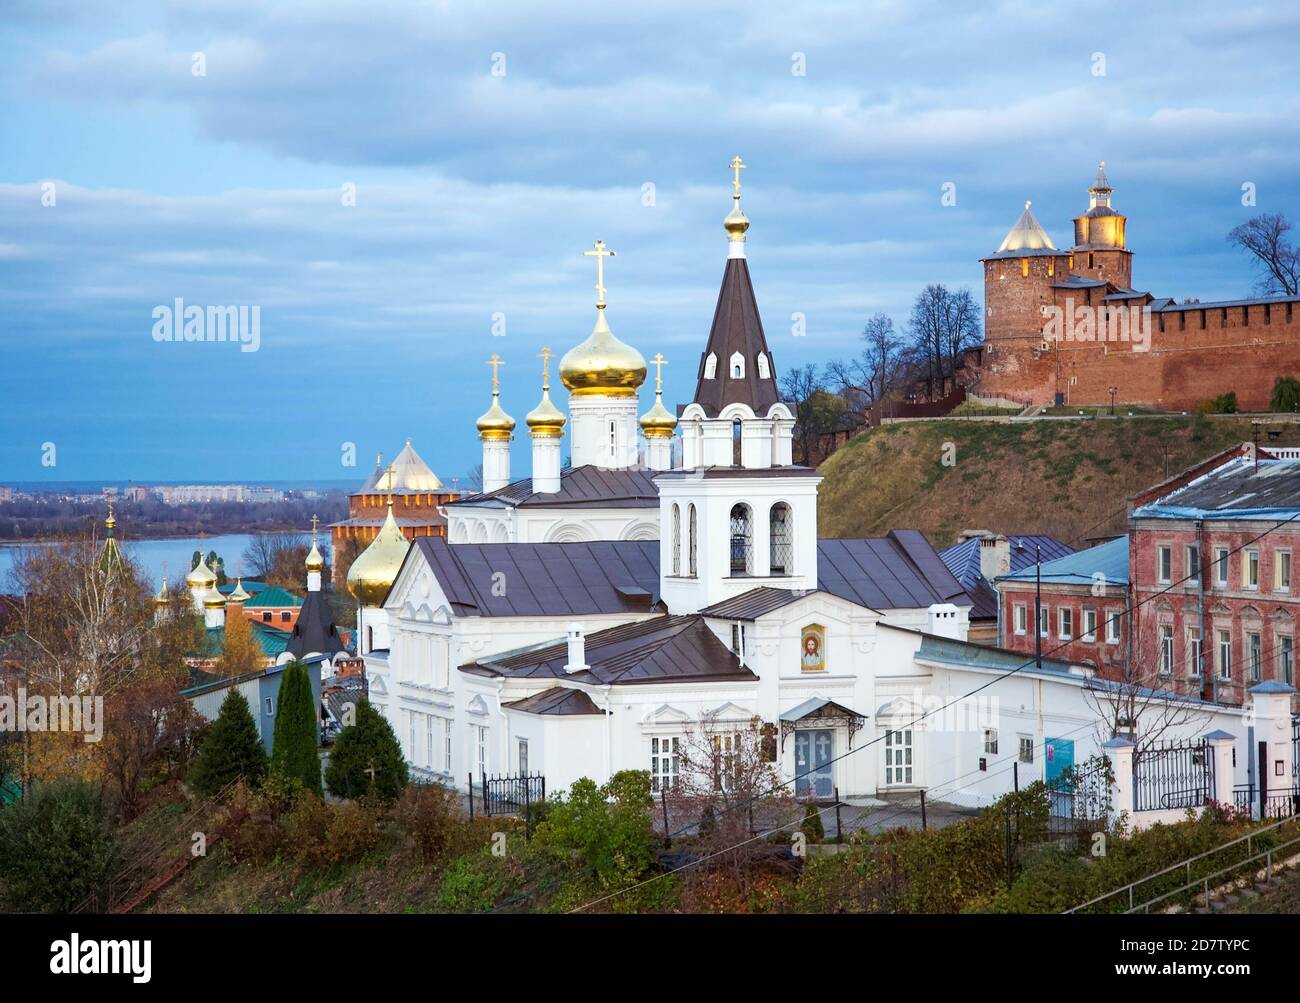 Autumn view of Orthodox Church with domes and spires and the a Kremlin in evening light in the Russian town of Nizhny Novgorod Stock Photo